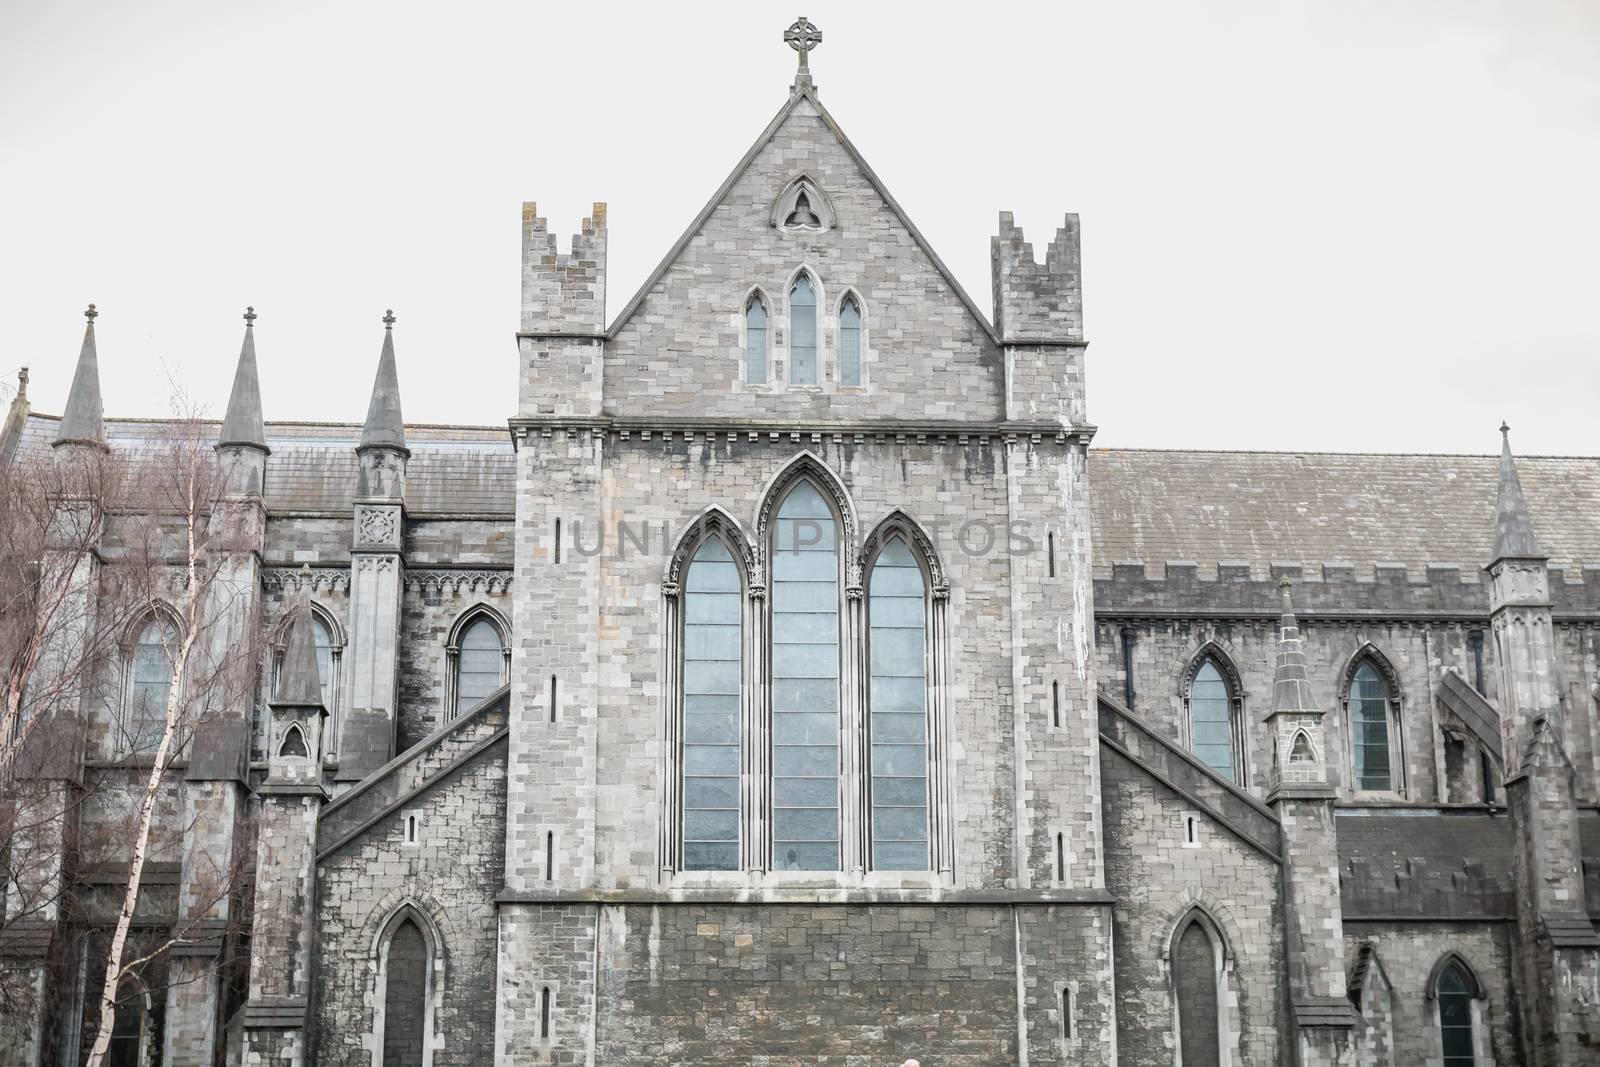 architectural detail of St Patrick's Cathedral, Dublin Ireland.